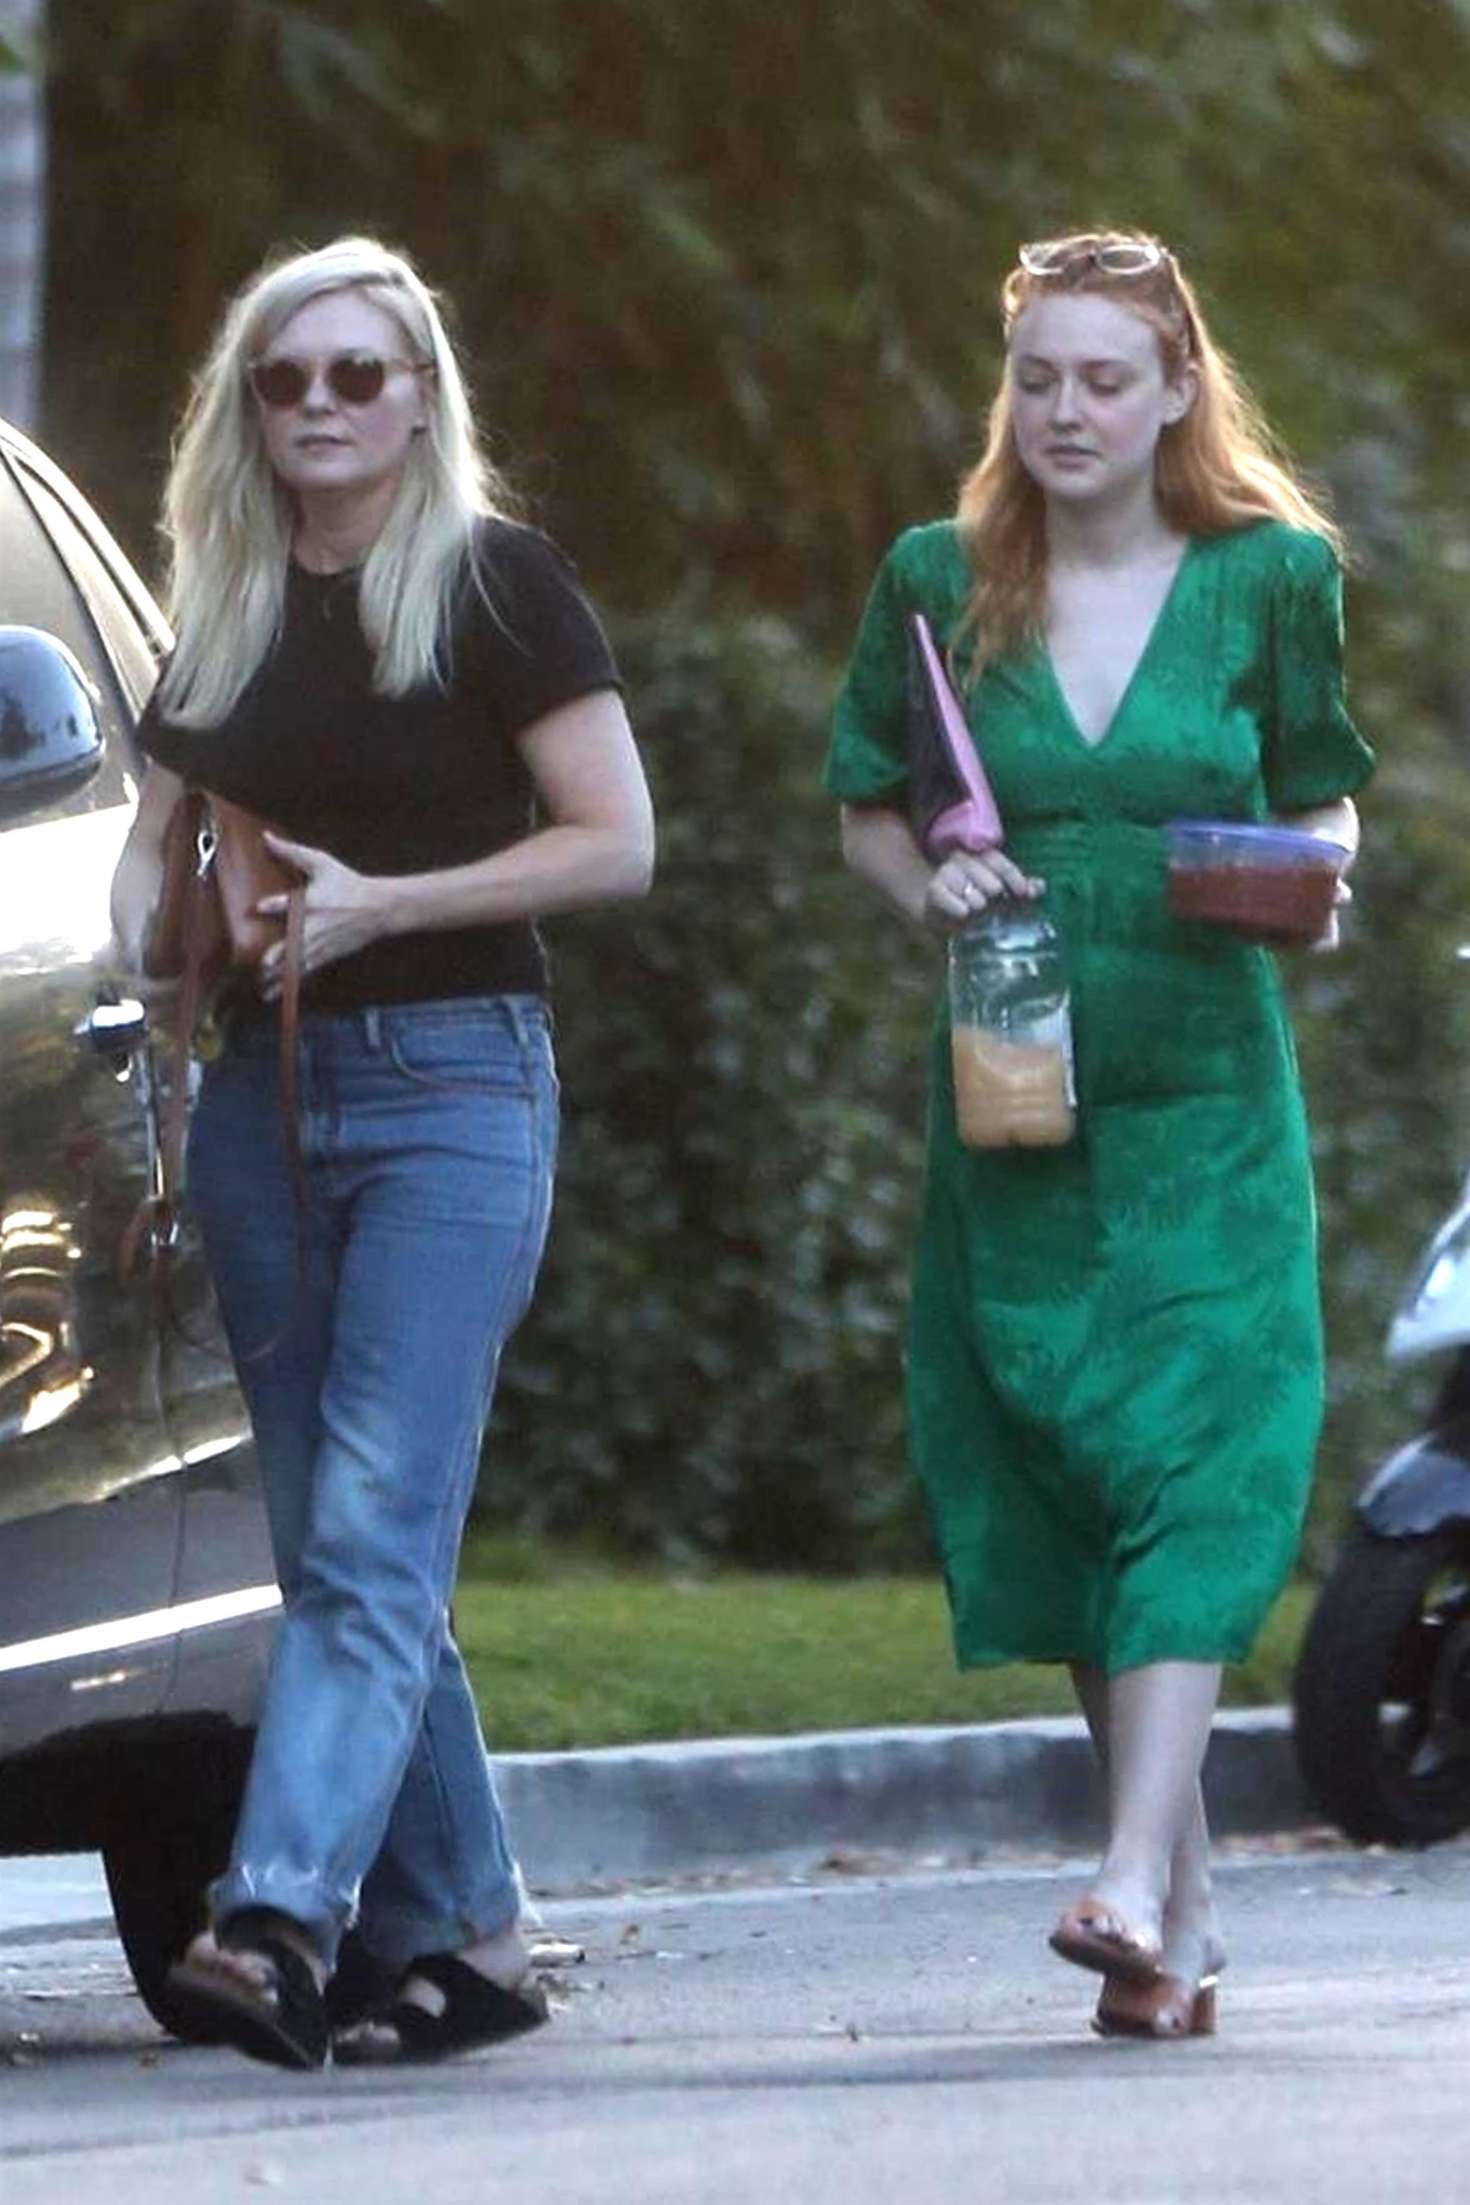 Dakota Fanning and Kirsten Dunst â€“ Heading to a party together in Los Angeles